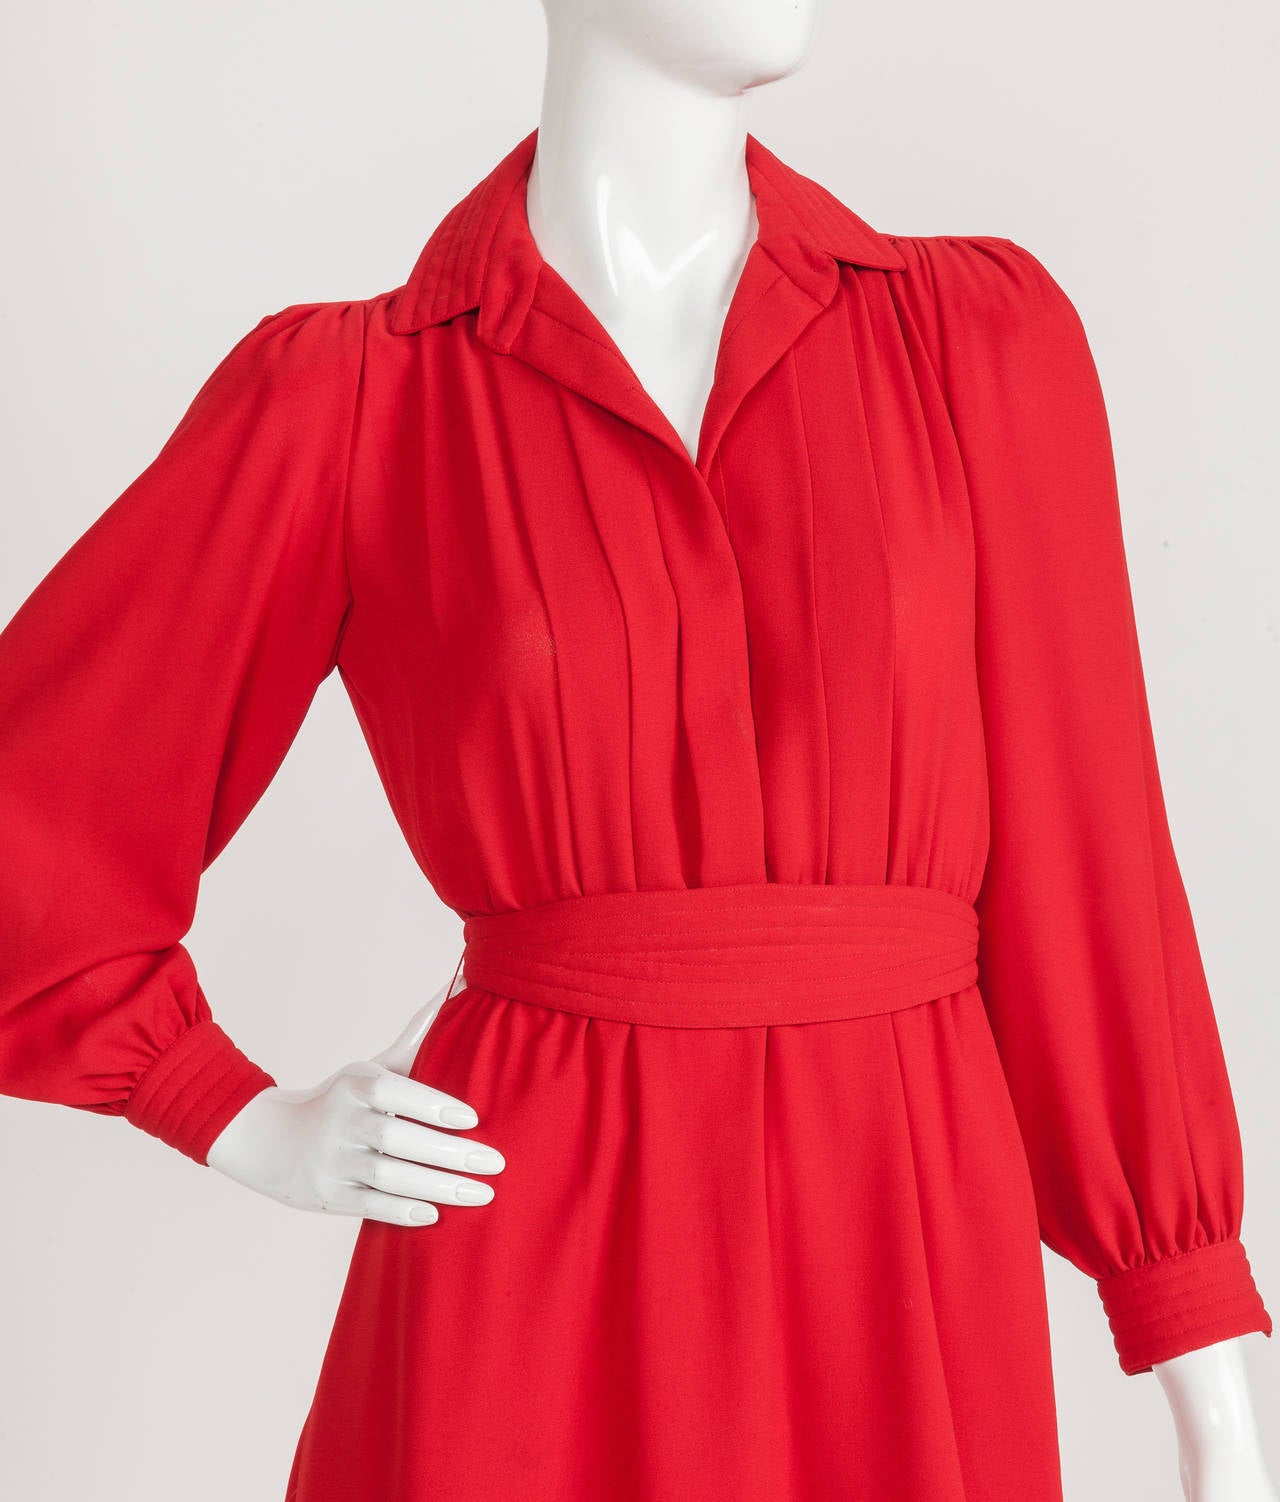 I have a special place in my heart for the secretary dress and this 1980's Pierre Cardin secretary dress in shade of bright red is no exception. I love the channel stitched design motif at the collar, sleeves and cumberbund-like tie sash at the